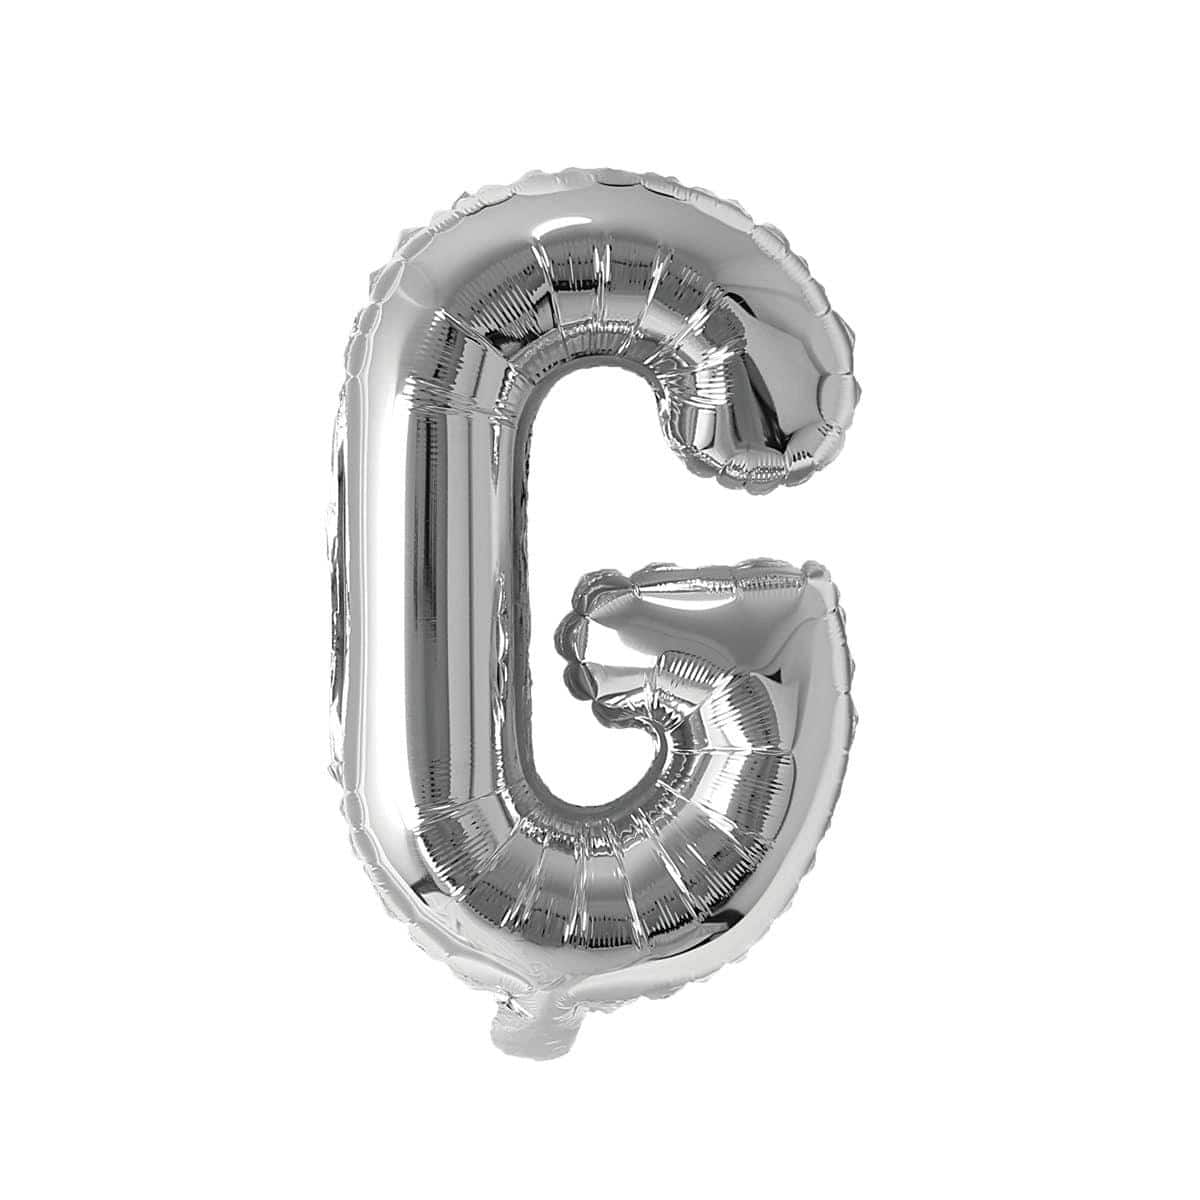 Buy Balloons Silver Letter G Foil Balloon, 16 Inches sold at Party Expert